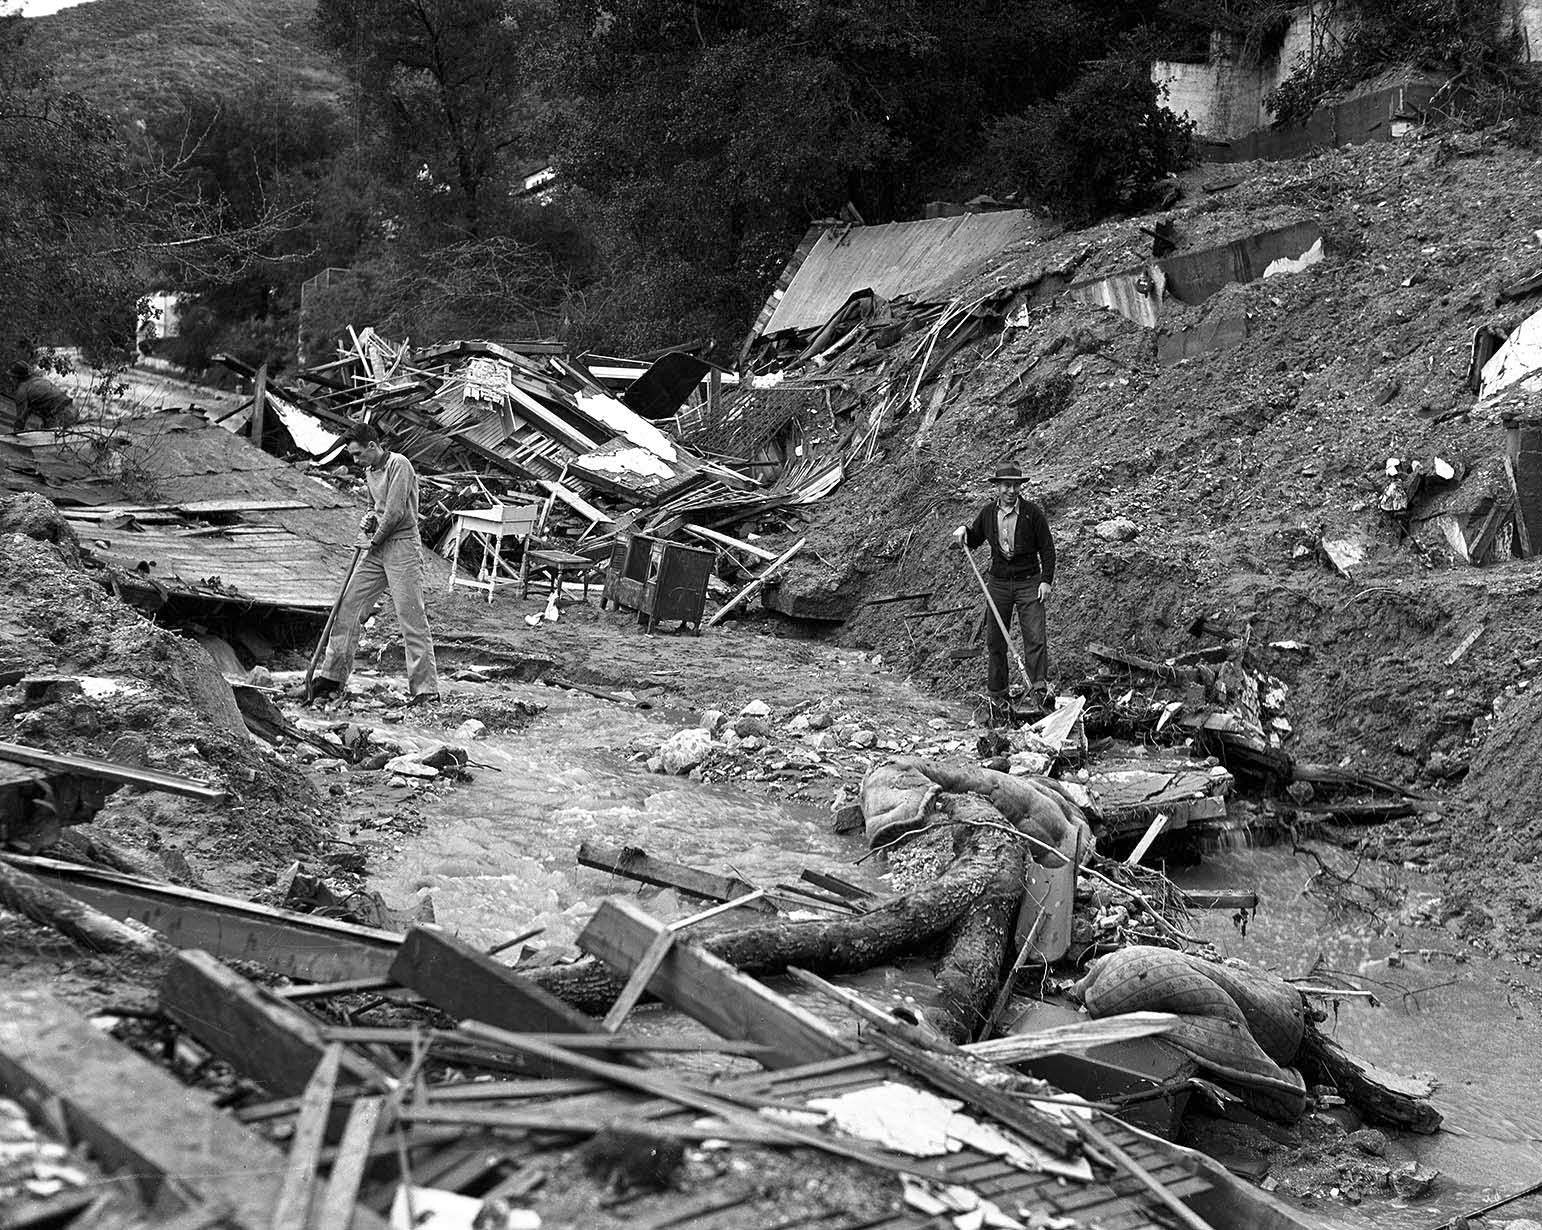 These ruins were once a residence on the 2000 block of Los Encinos Street, Glendale. Two men met their death when the house collapsed into the street. Workmen search for the bodies, 1938